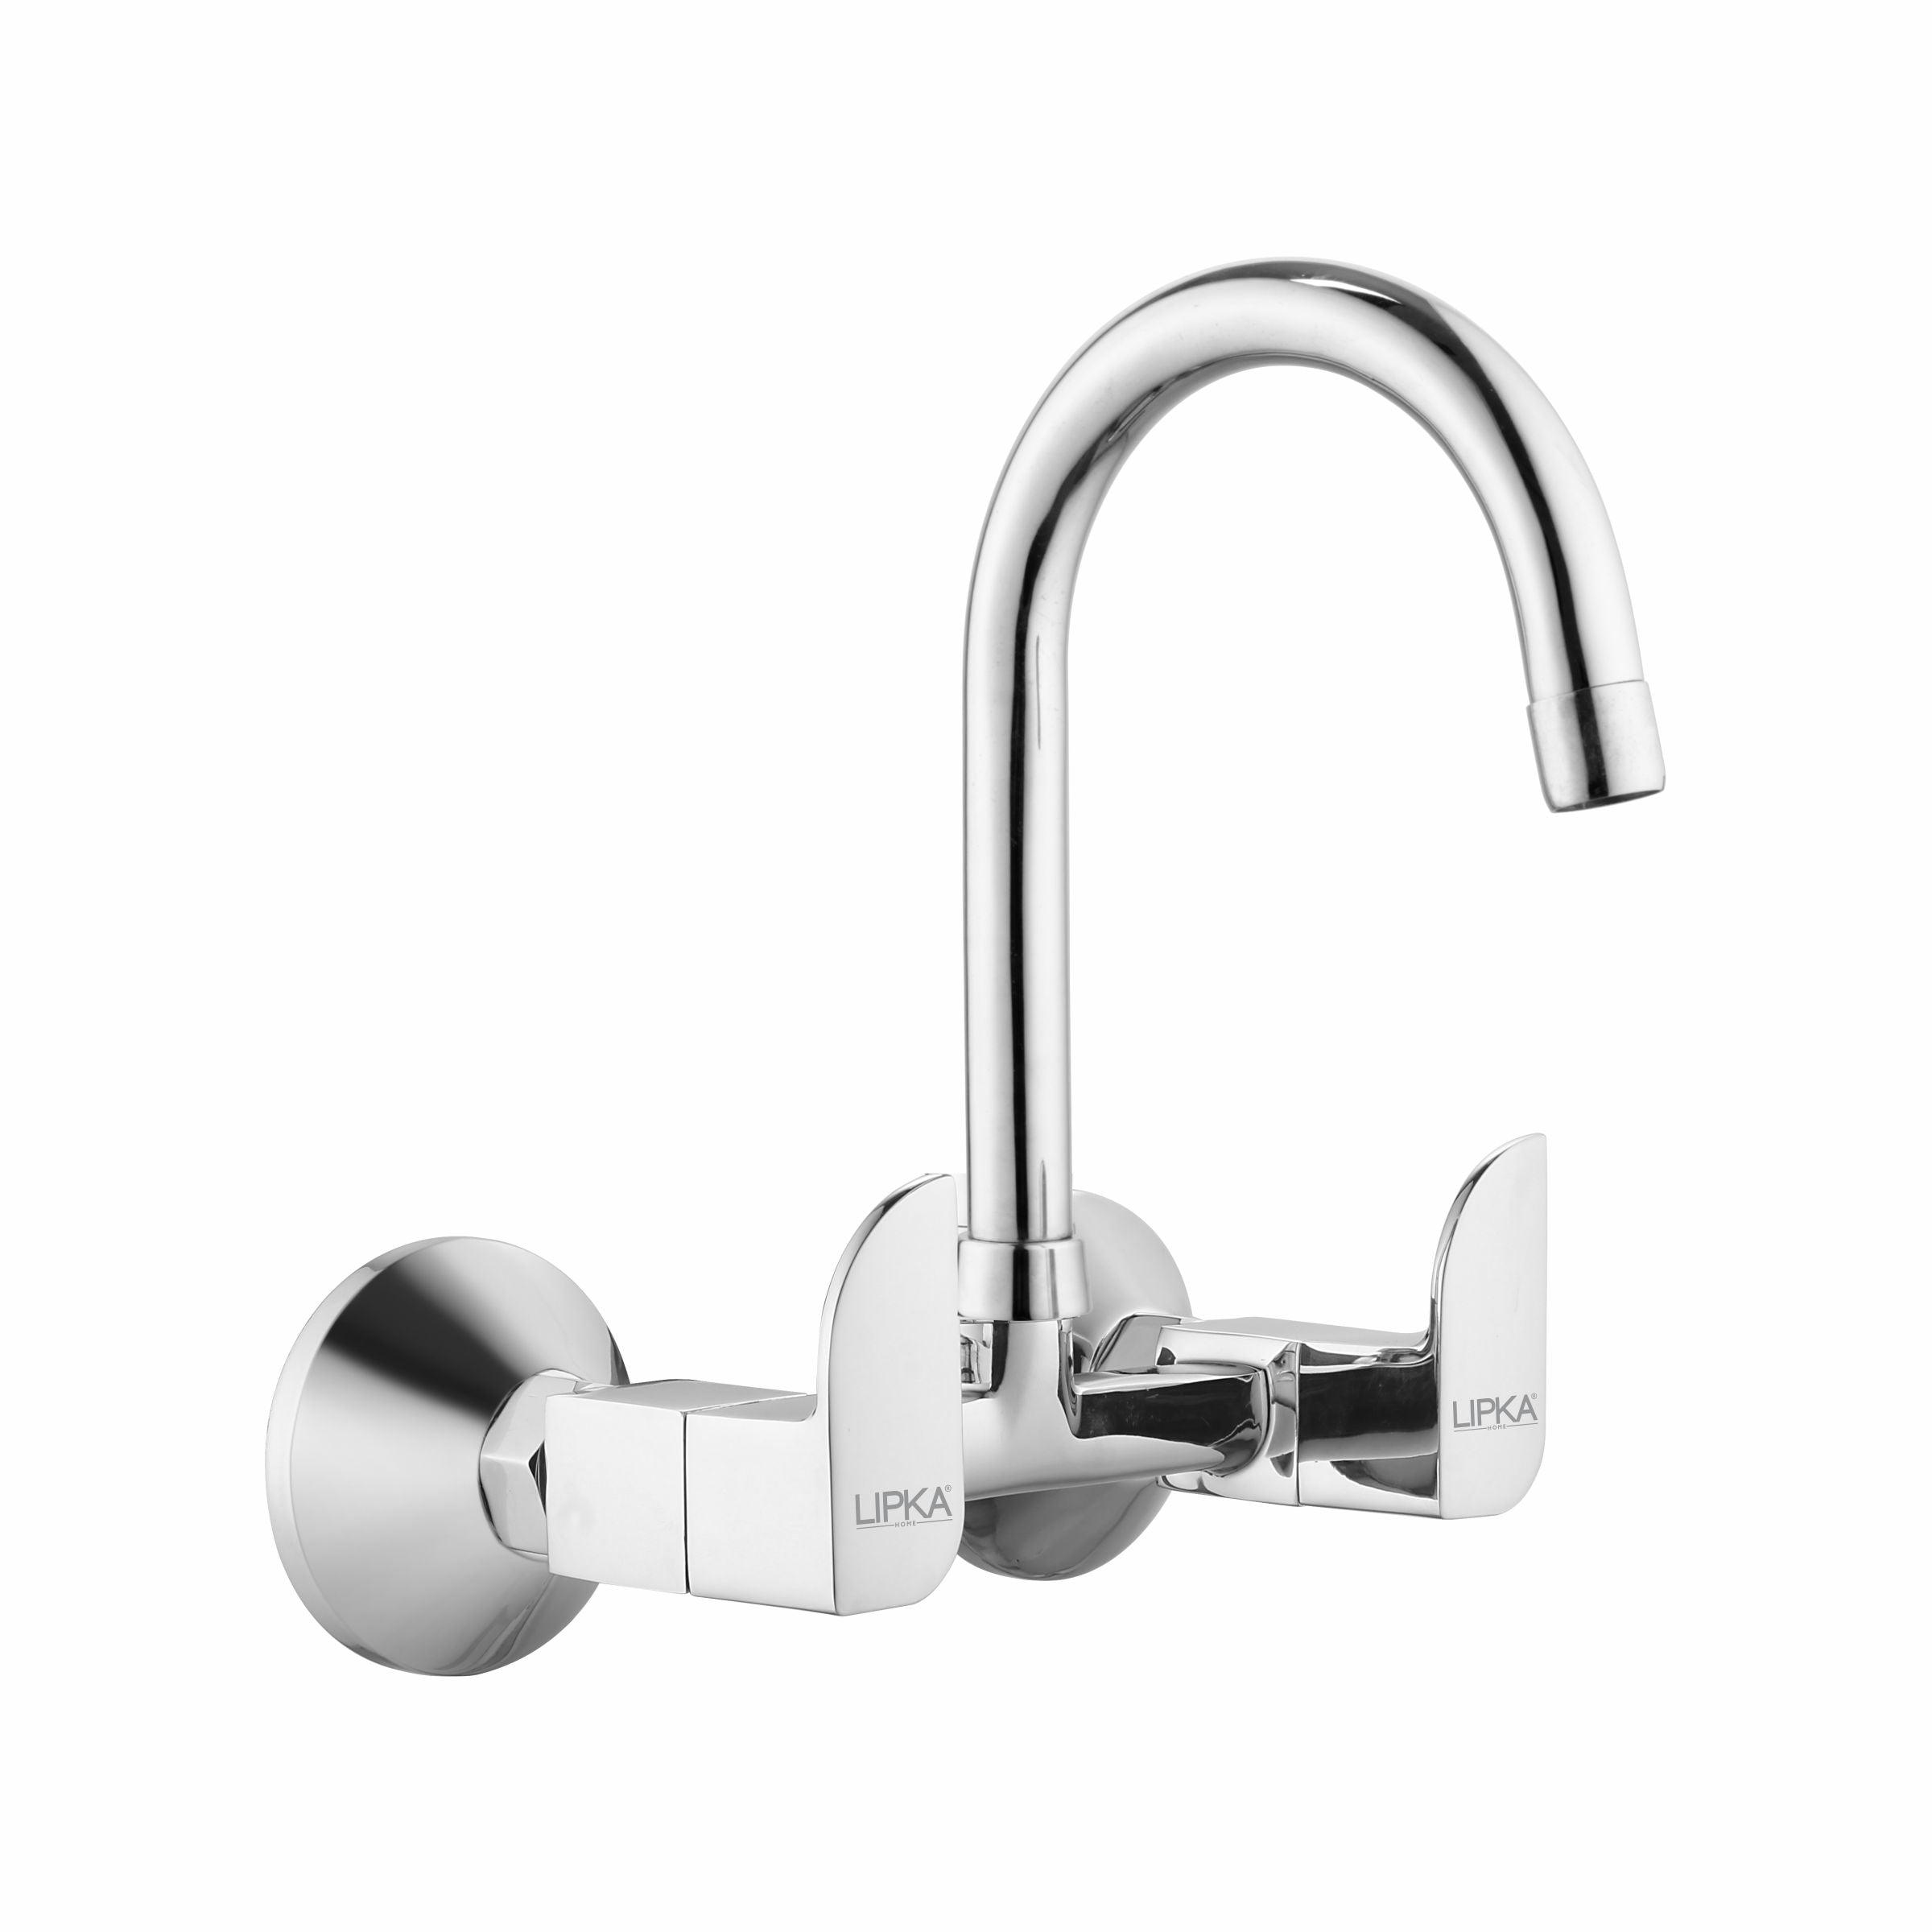 Arise Sink Mixer Brass Faucet with Round Swivel Spout (15 Inches) - LIPKA - Lipka Home